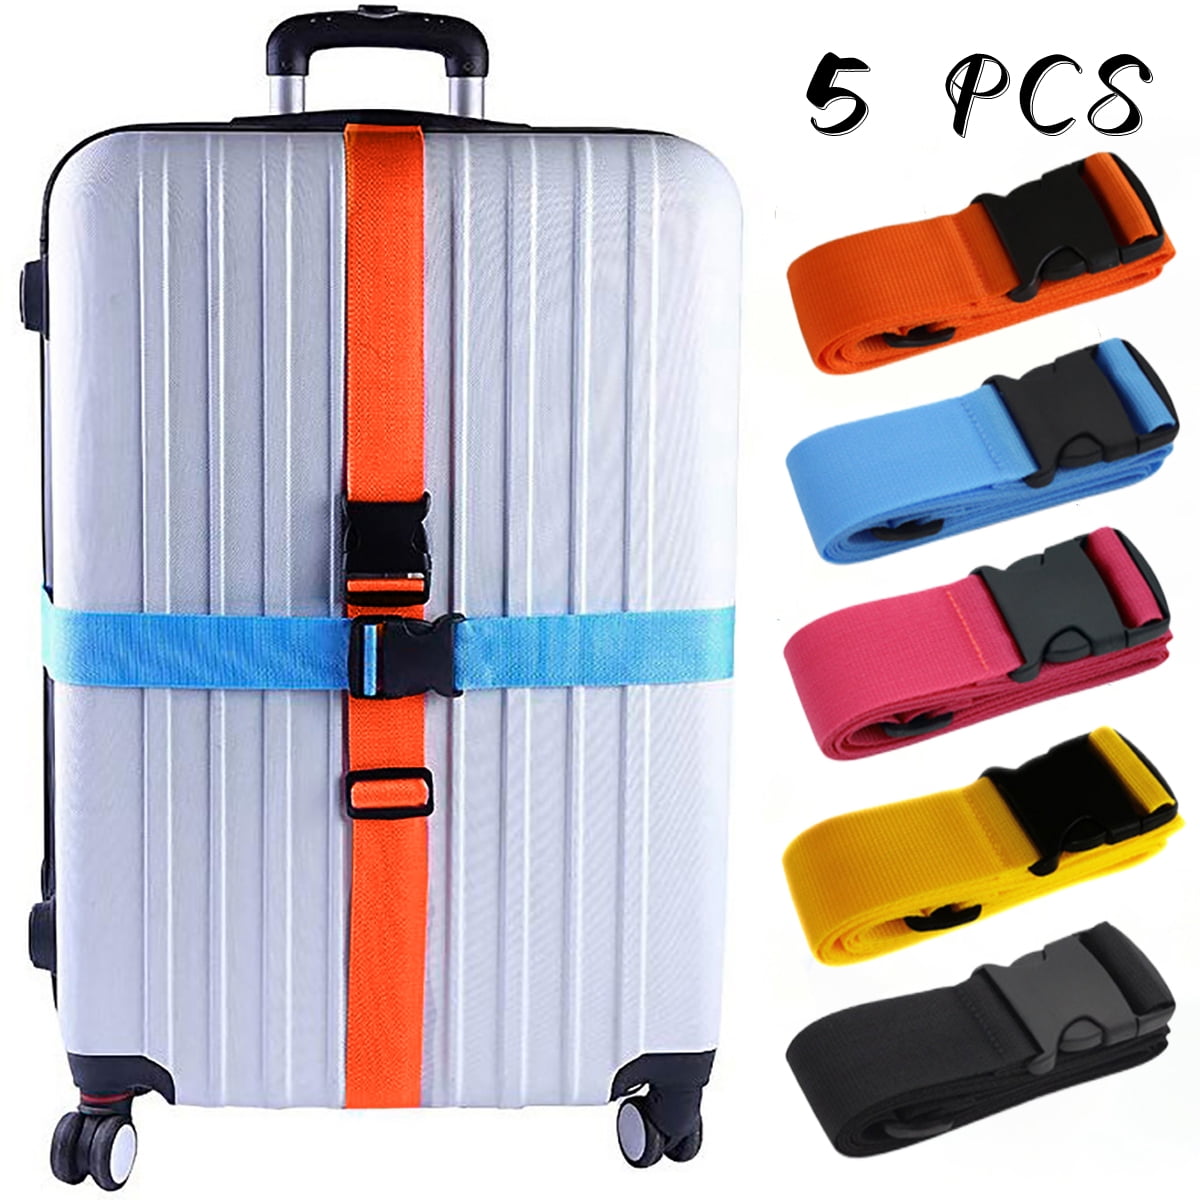 Add-A-Bag Luggage Strap Jacket Gripper Baggage Suitcase Straps Belts For  Travel